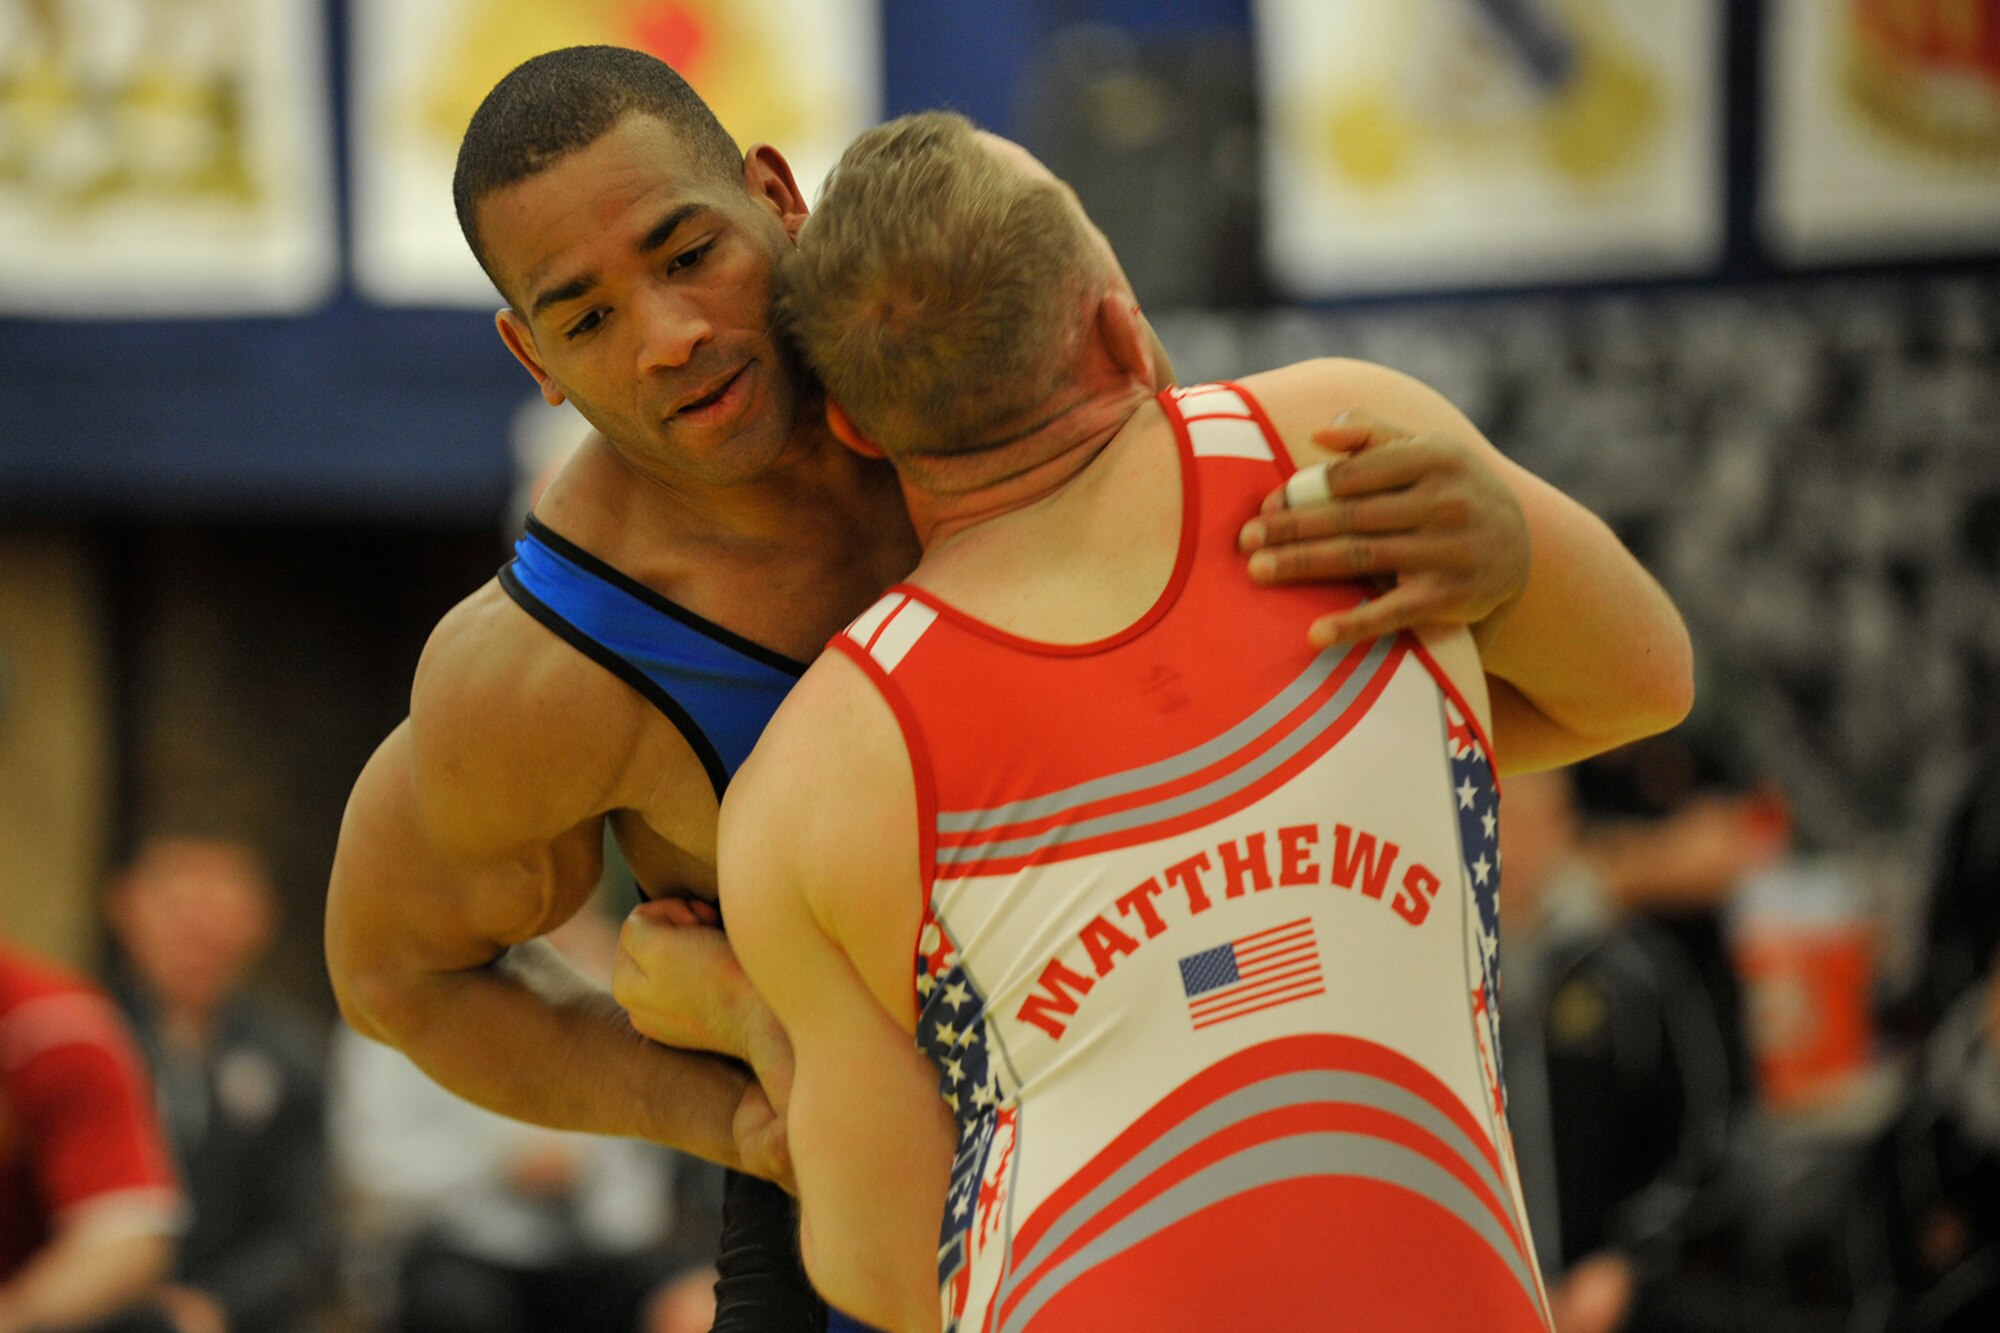 Sherwin Severin grapples with his opponent during the 2015 Armed Forces Wrestling Championships at Fort Carson, Colorado, March 27. Based out of Joint Base Anacostia-Bolling, Washington D.C., and wrestling in the 176 lb. division, Severin, a master sergeant, earned silver in Greco Roman wrestling. (U.S. Air Force photo/Robb Lingley)